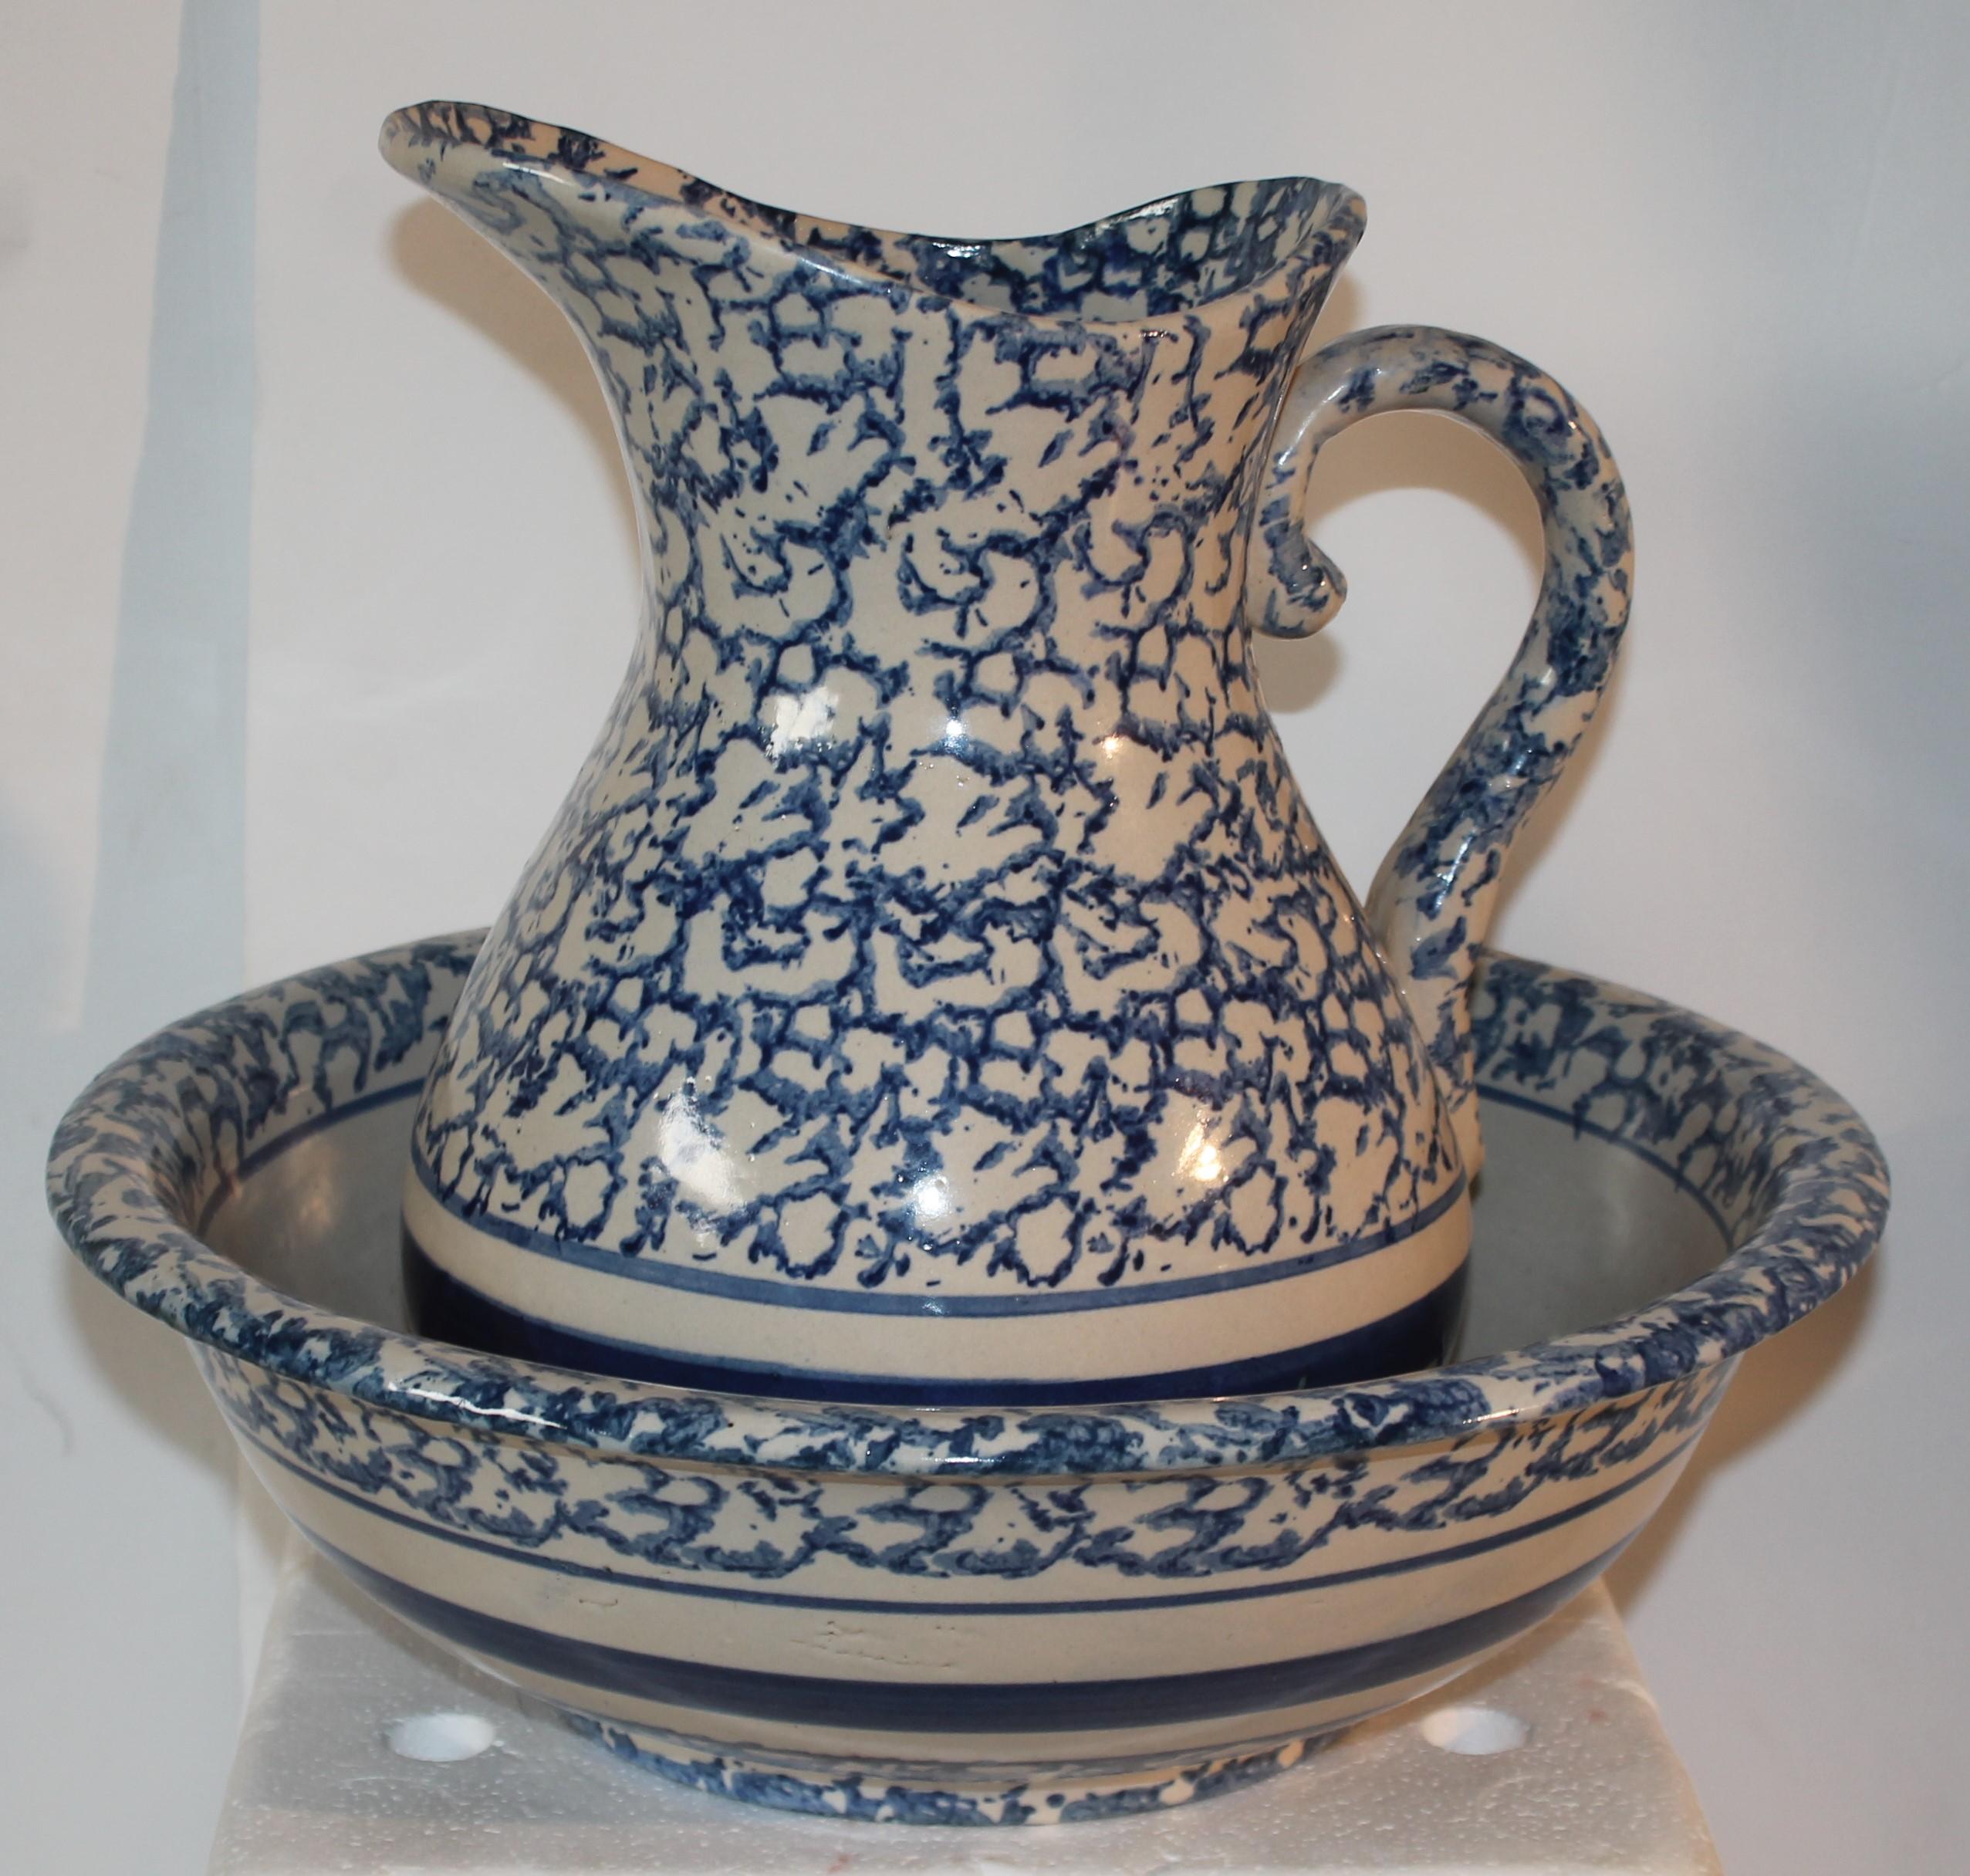 19Thc Blue & white sponge ware pitcher and bowl in pristine condition. This hand painted sponge pottery pitcher & bowl is in very good condition. Great addition to any collection.

Measurements are approximate - 
bowl- 14.5 diameter x 4.5 high